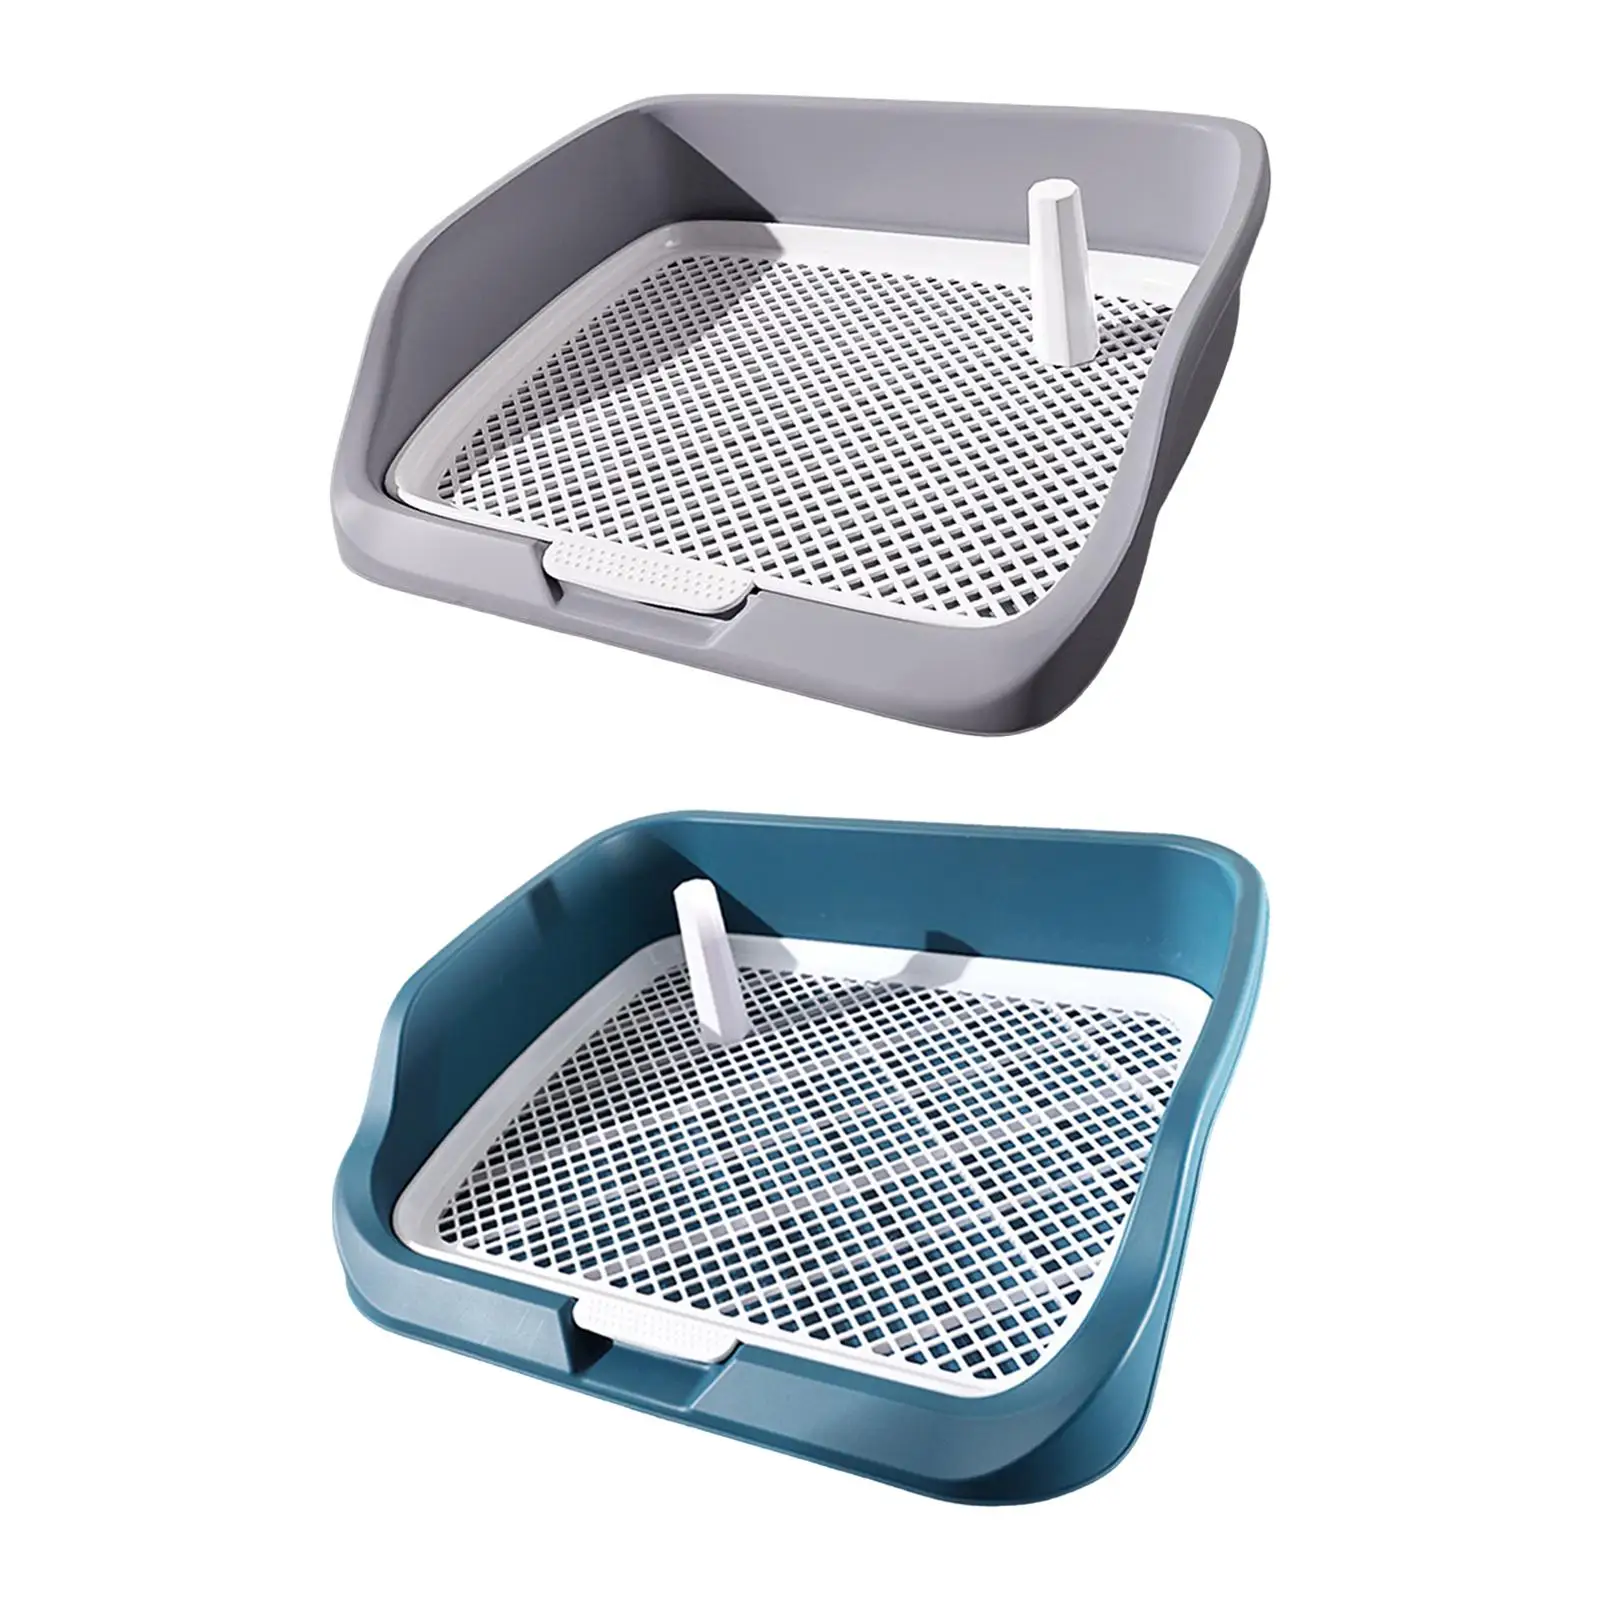 Pet Dog Toilet Puppy Potty Tray Indoor Outdoor for Cat Portable Dog Potty Pan Litter Pan Litter Box Indoor Potty Tray